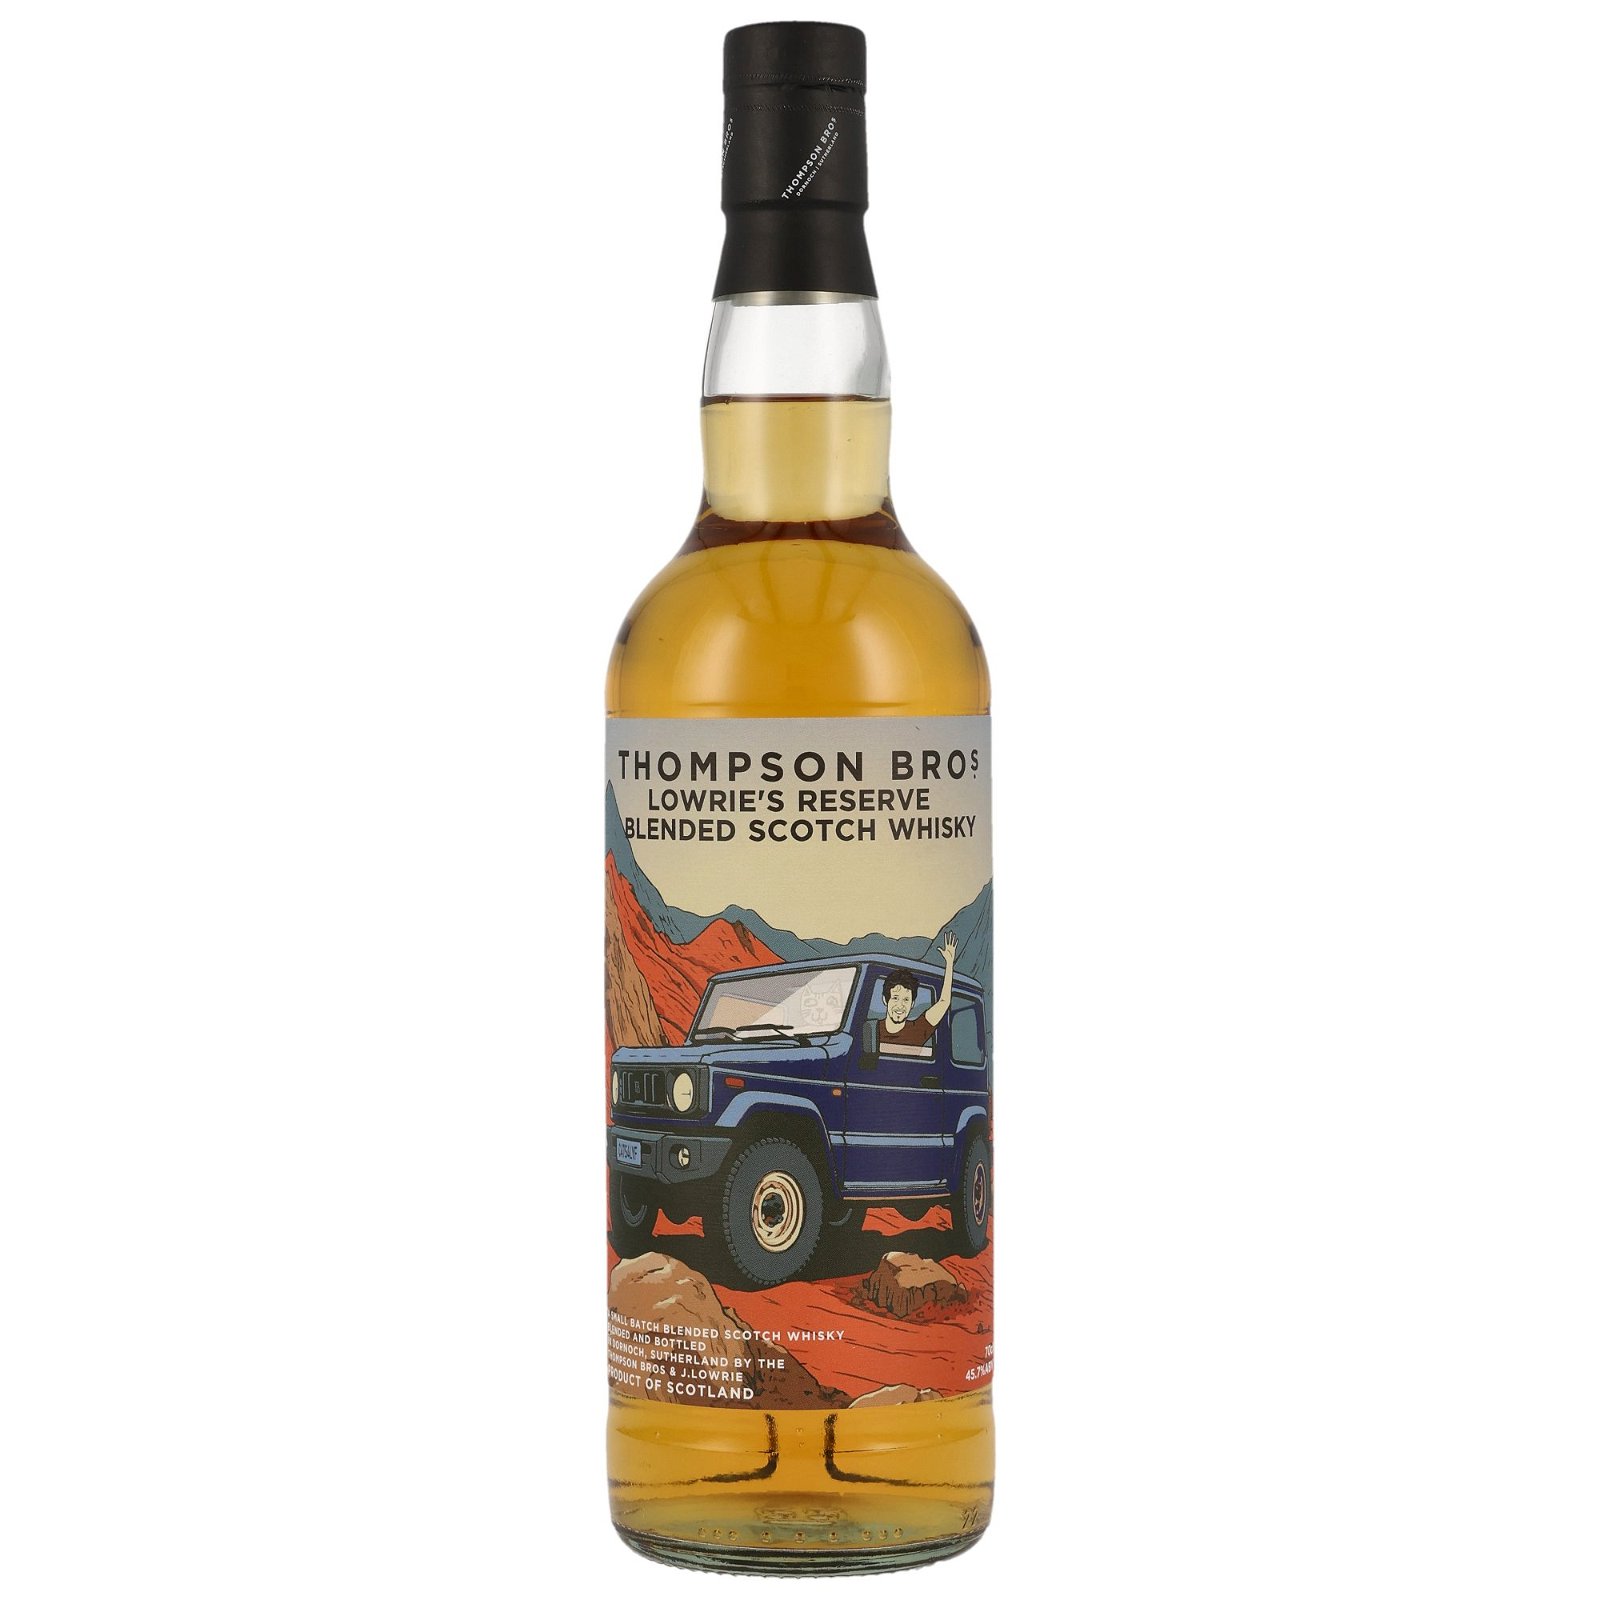 Thompson Bros. Lowrie's Reserve Blended Scotch Whisky